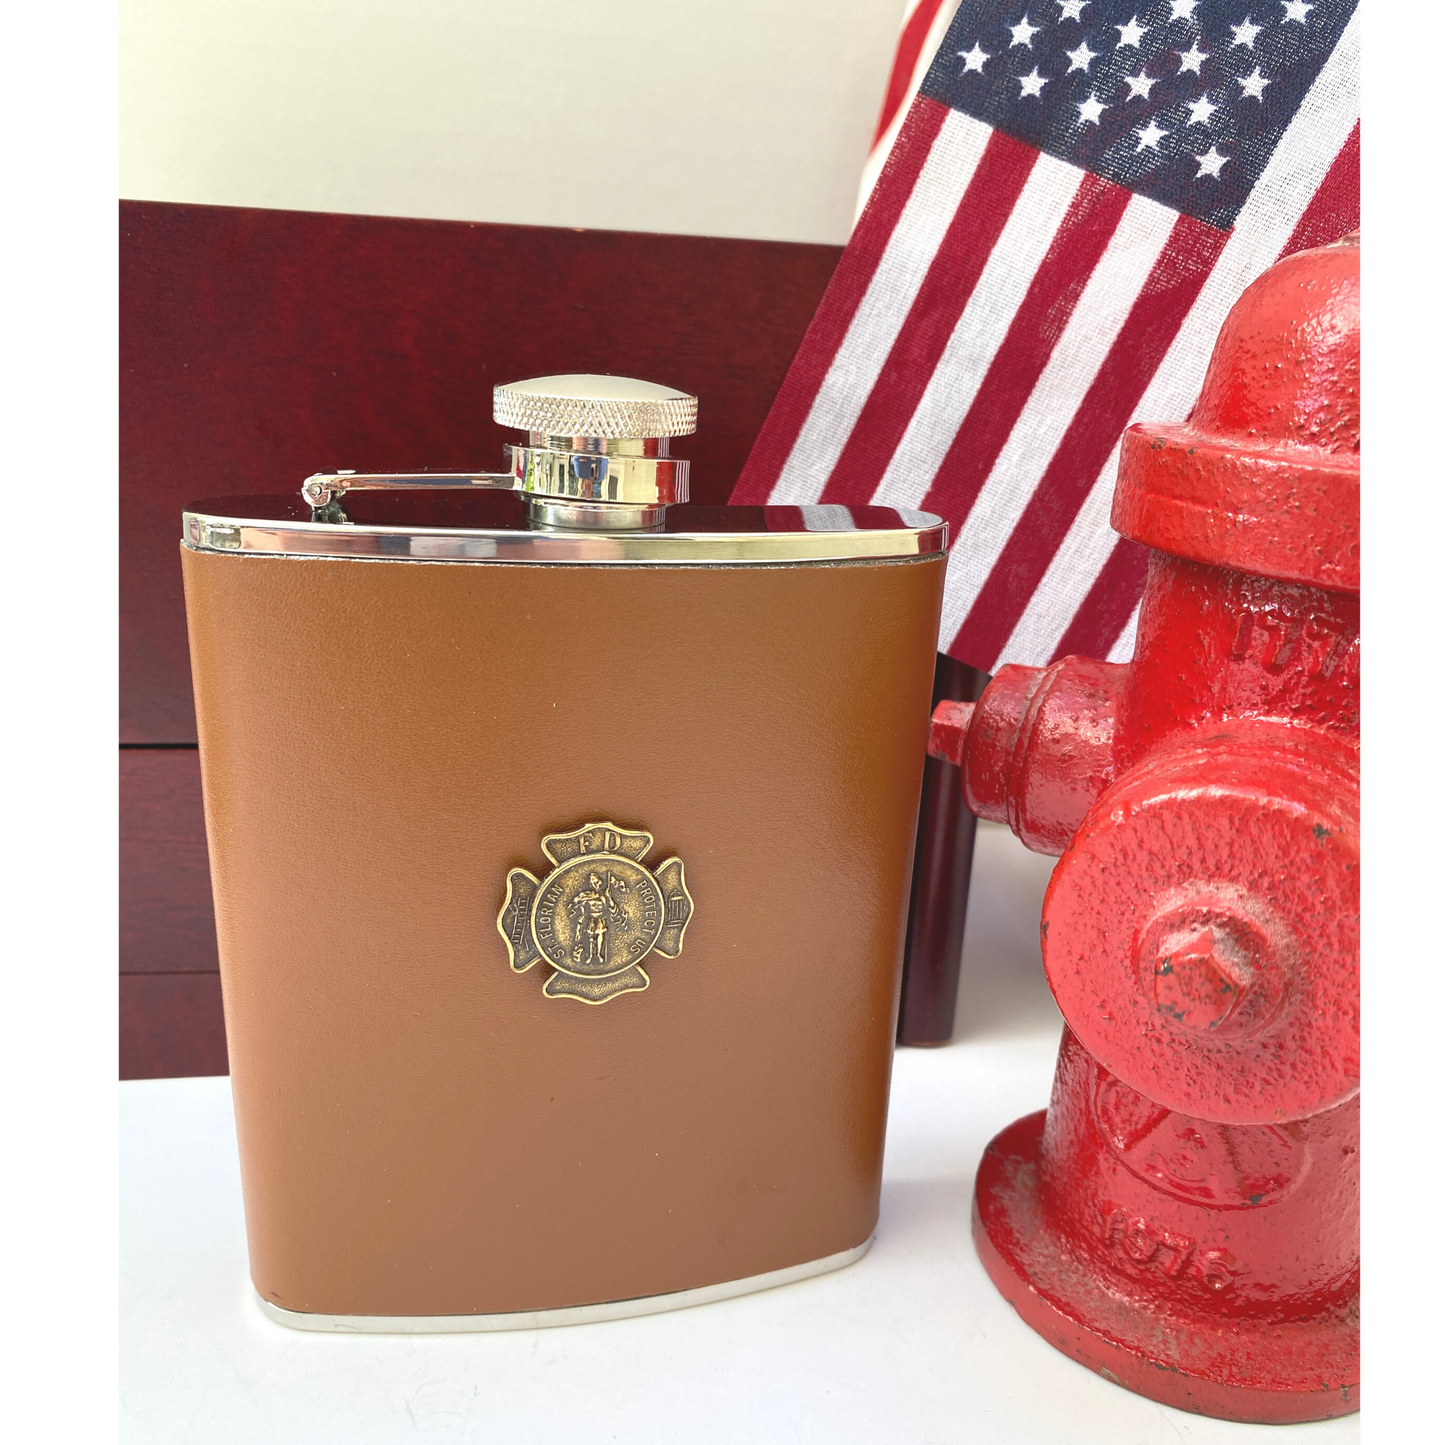 Shop Now for Firefighter Gift,  Leather Flask, Saint Florian Medallion